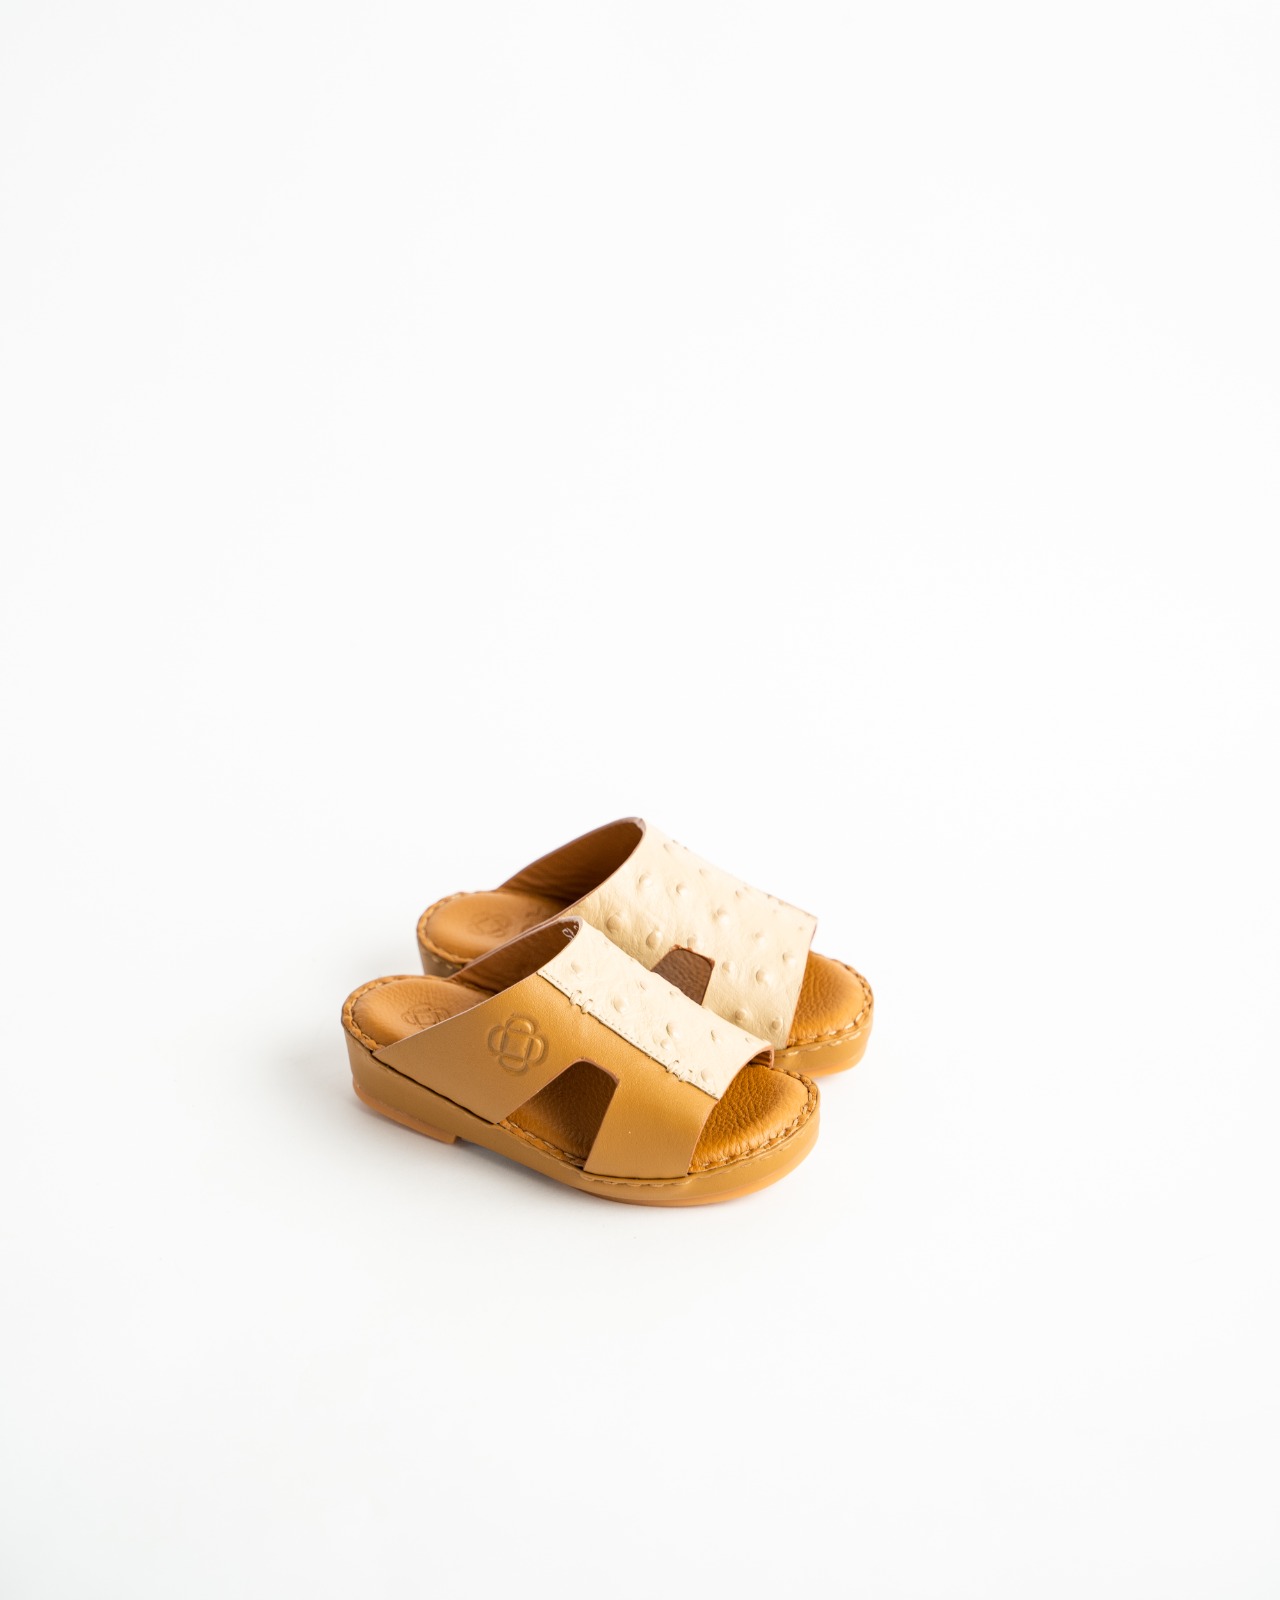 Buy OBH Sandals Kids SP Model 1 Canyon Color Online in UAE | OBH Collection